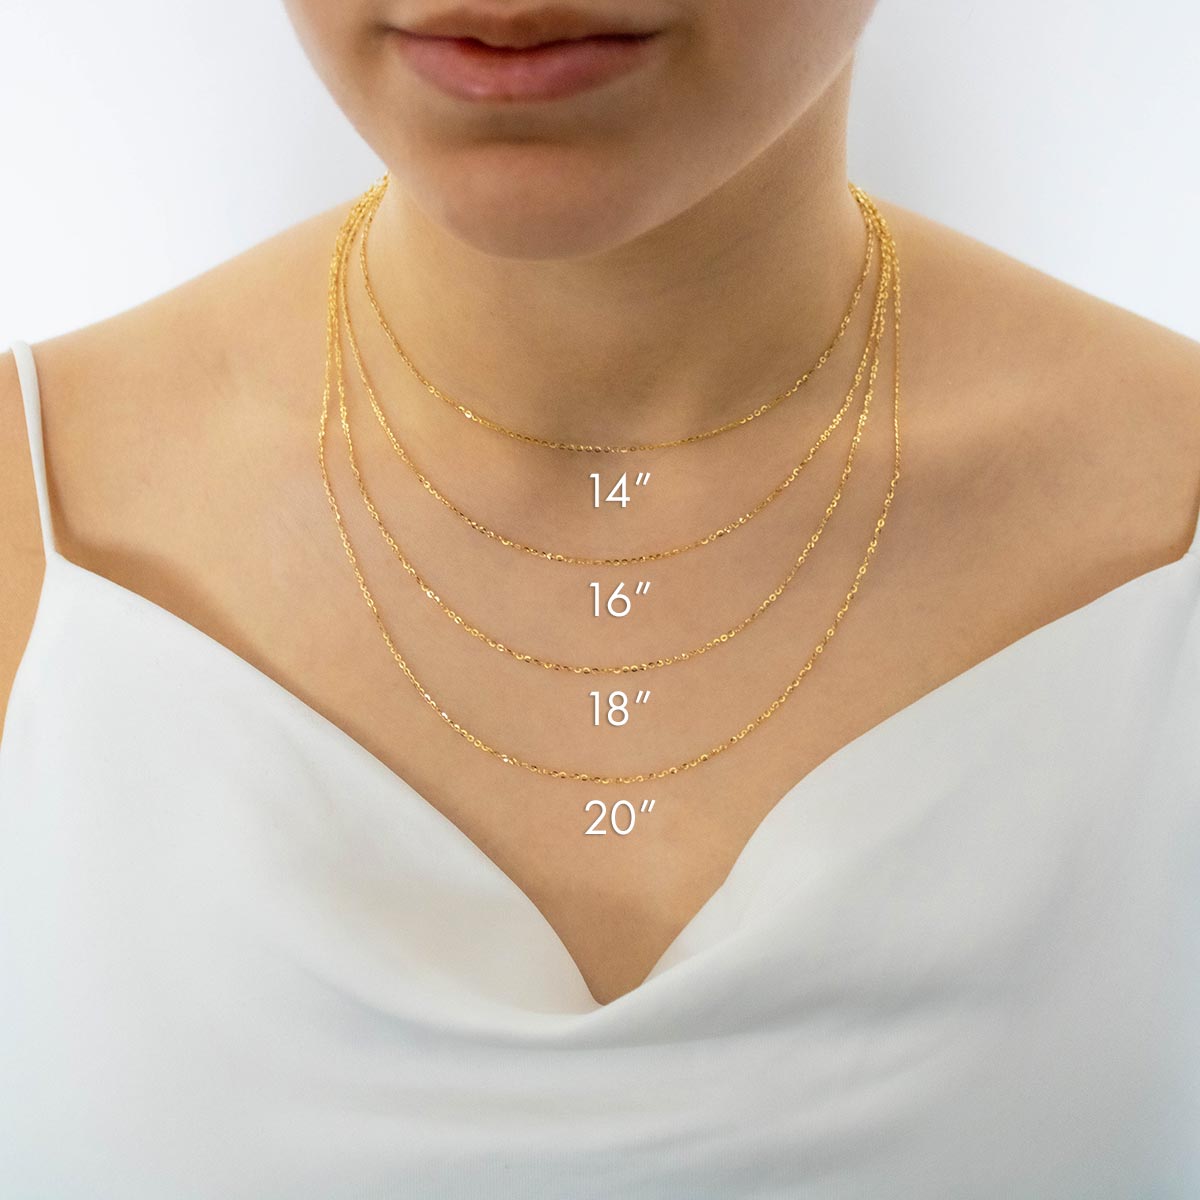 Necklace Size Guide 1